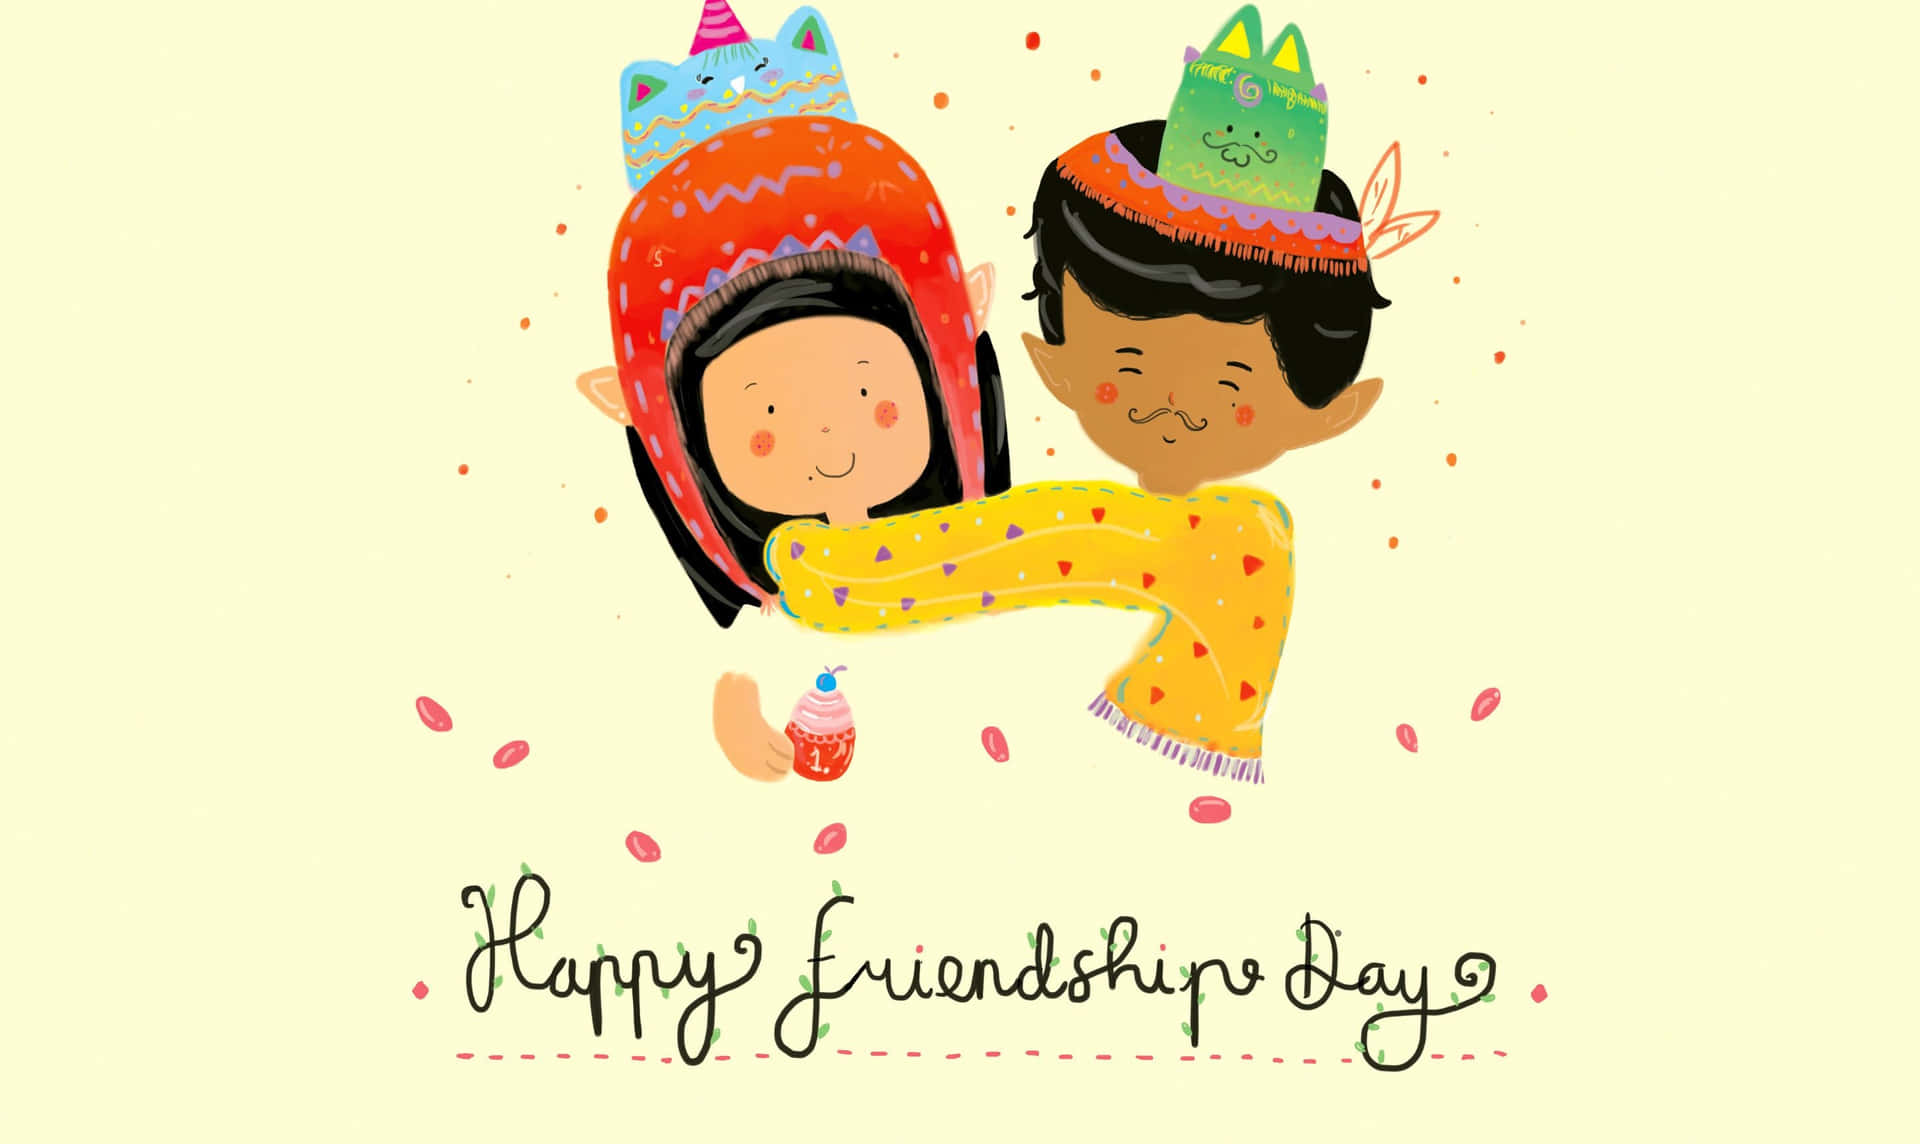 Celebrate Friendship Day the right way: surround yourself with the people who make your heart sing!